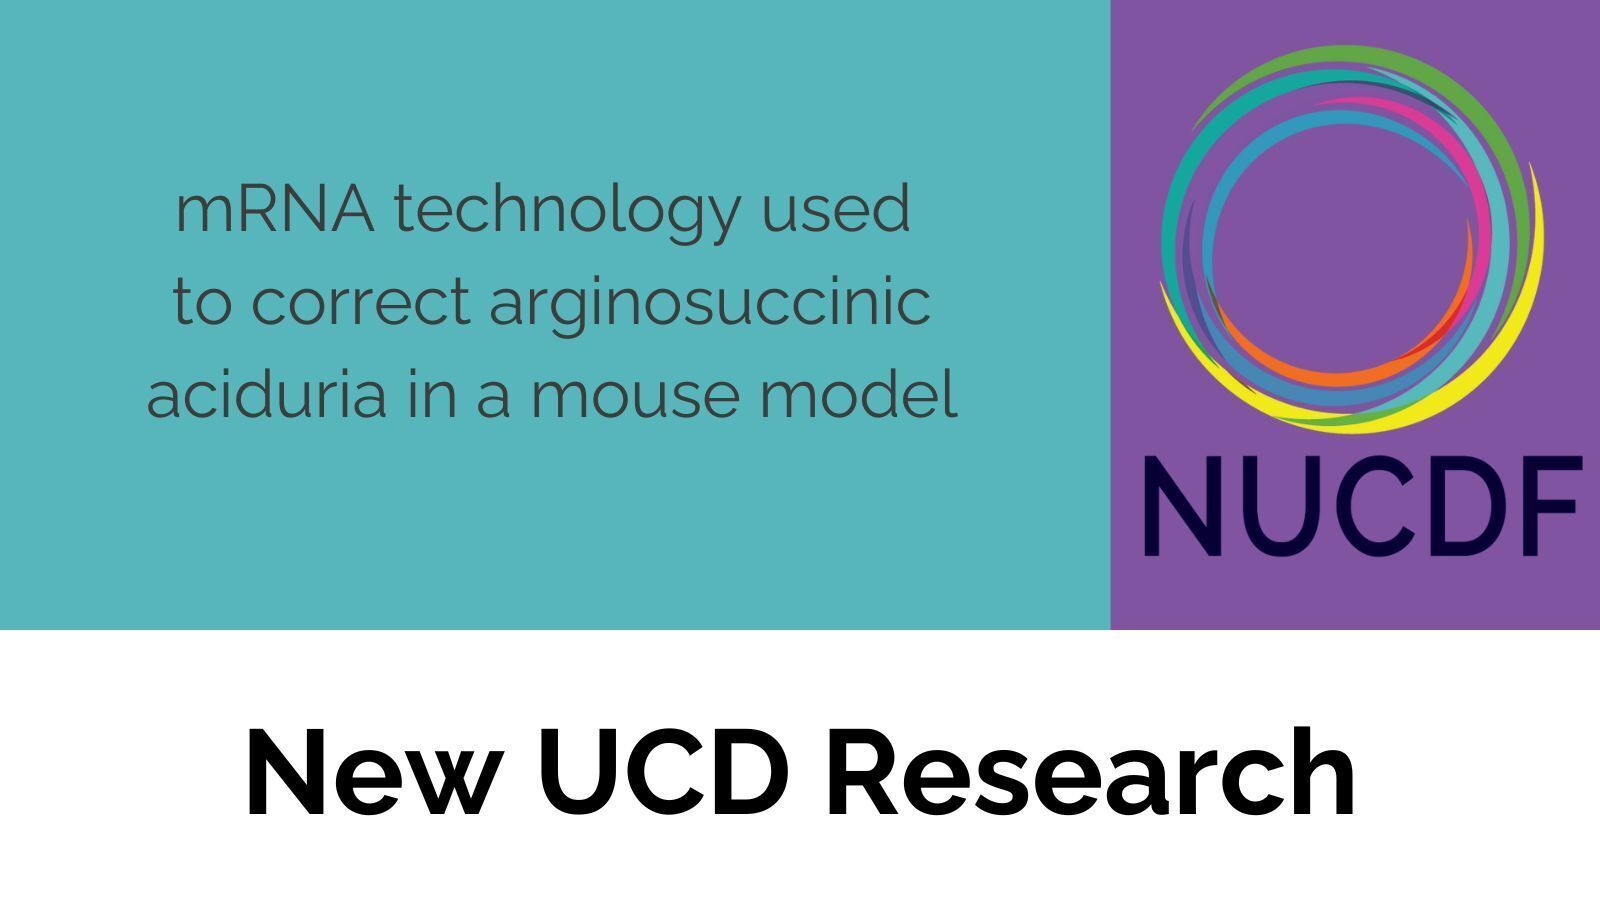 New UCD research: mRNA technology used to correct arginosuccinic aciduria in a mouse model